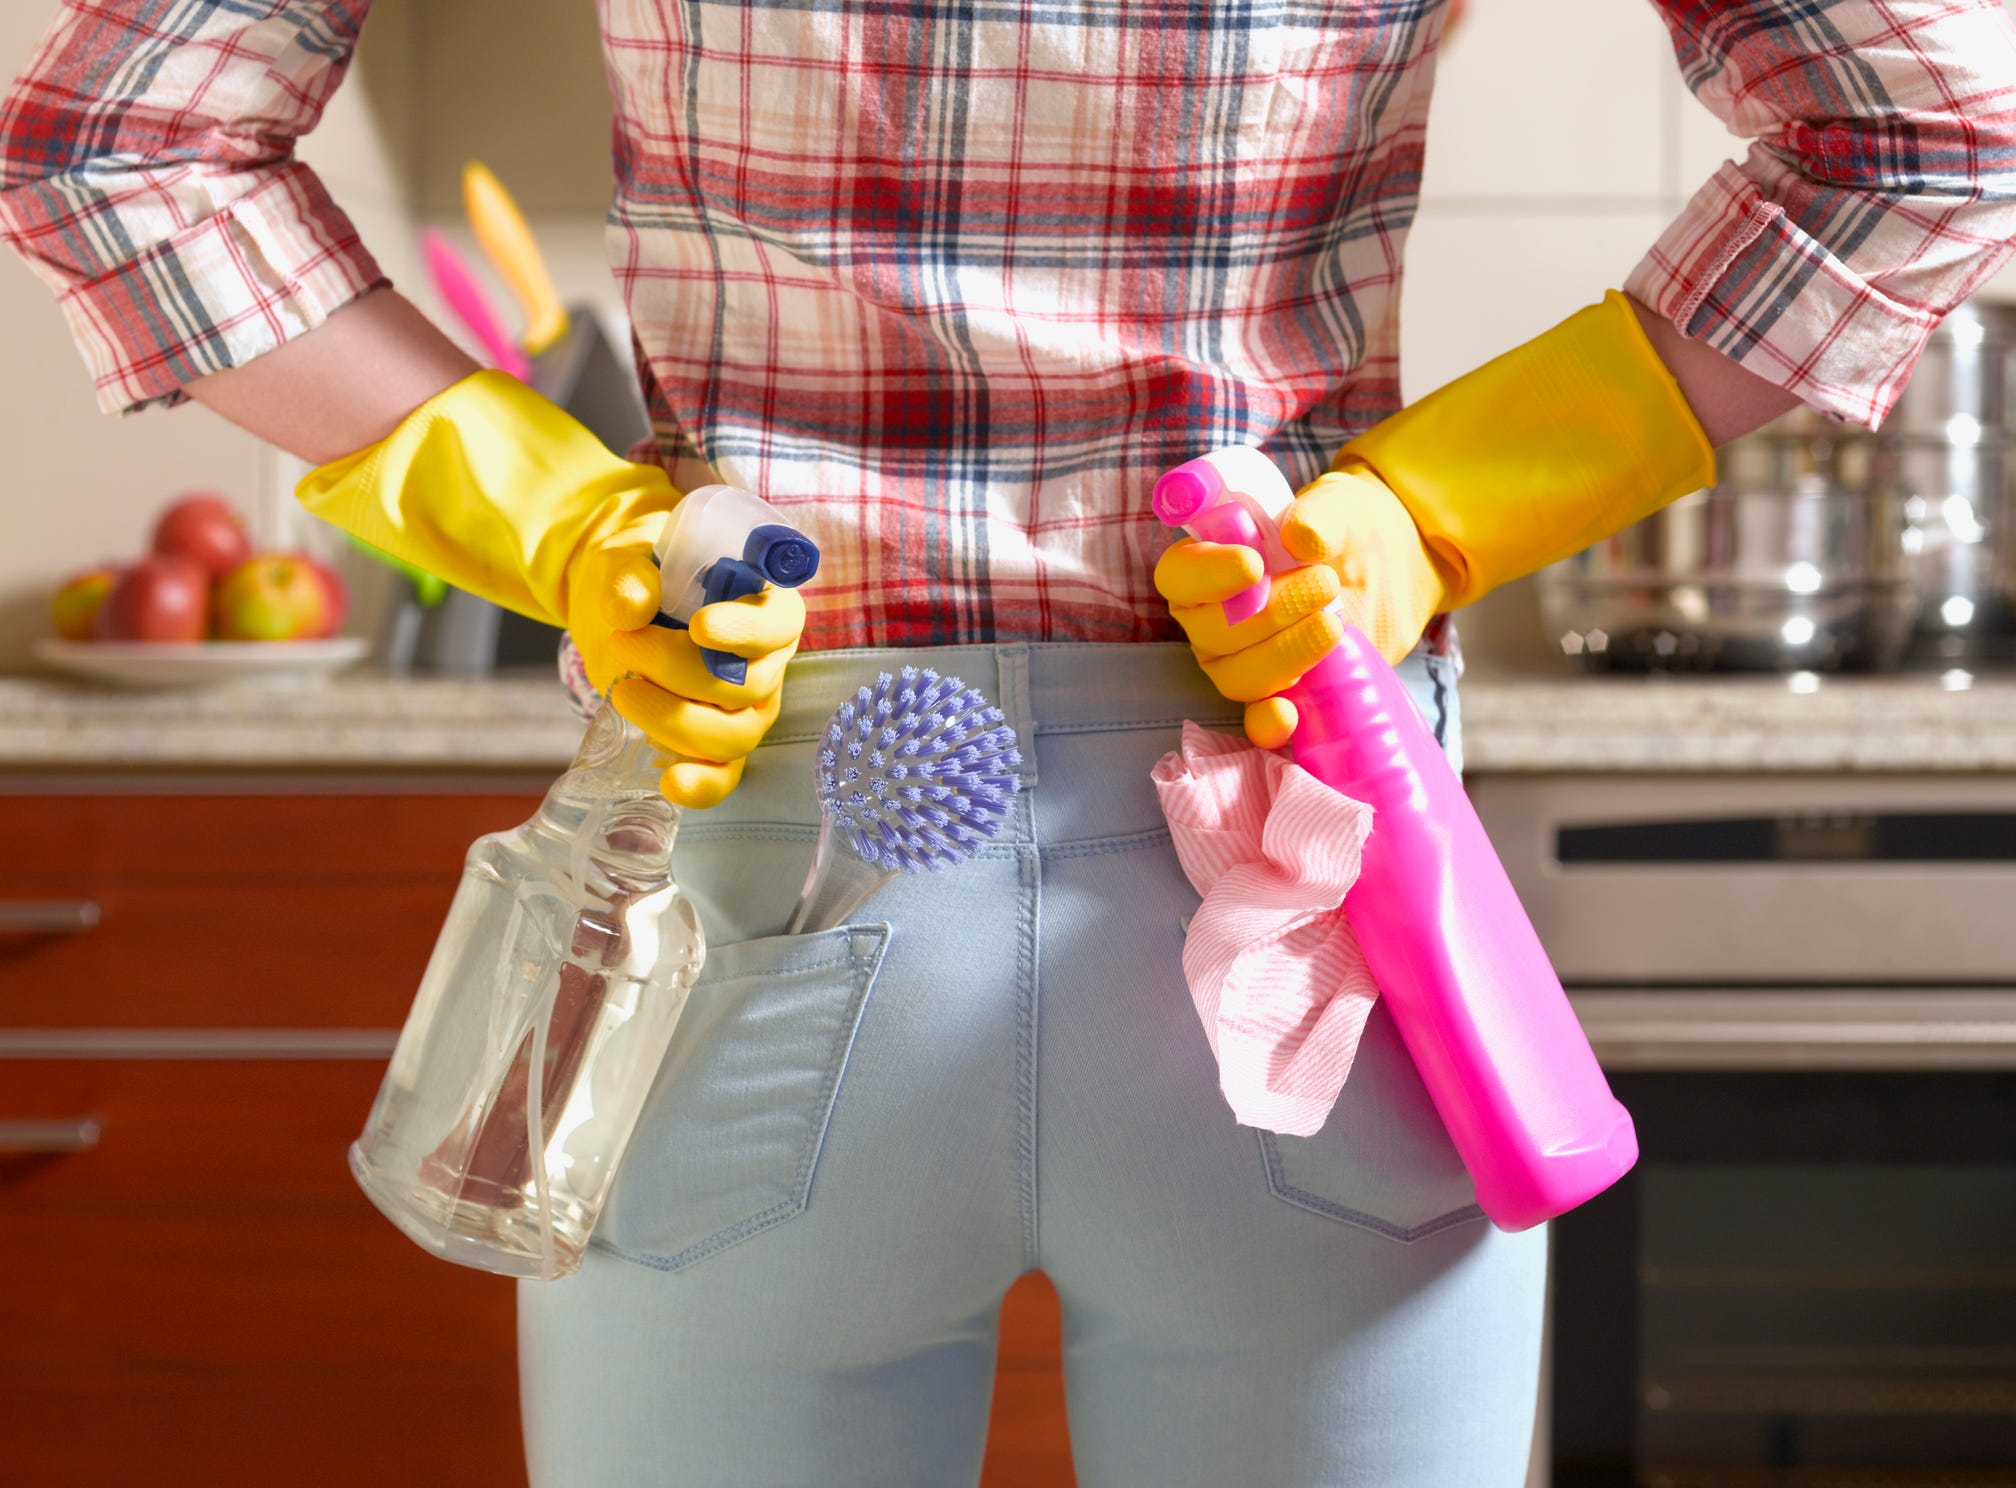 How to Clean Your House Quickly and Efficiently, Per Expert Tips